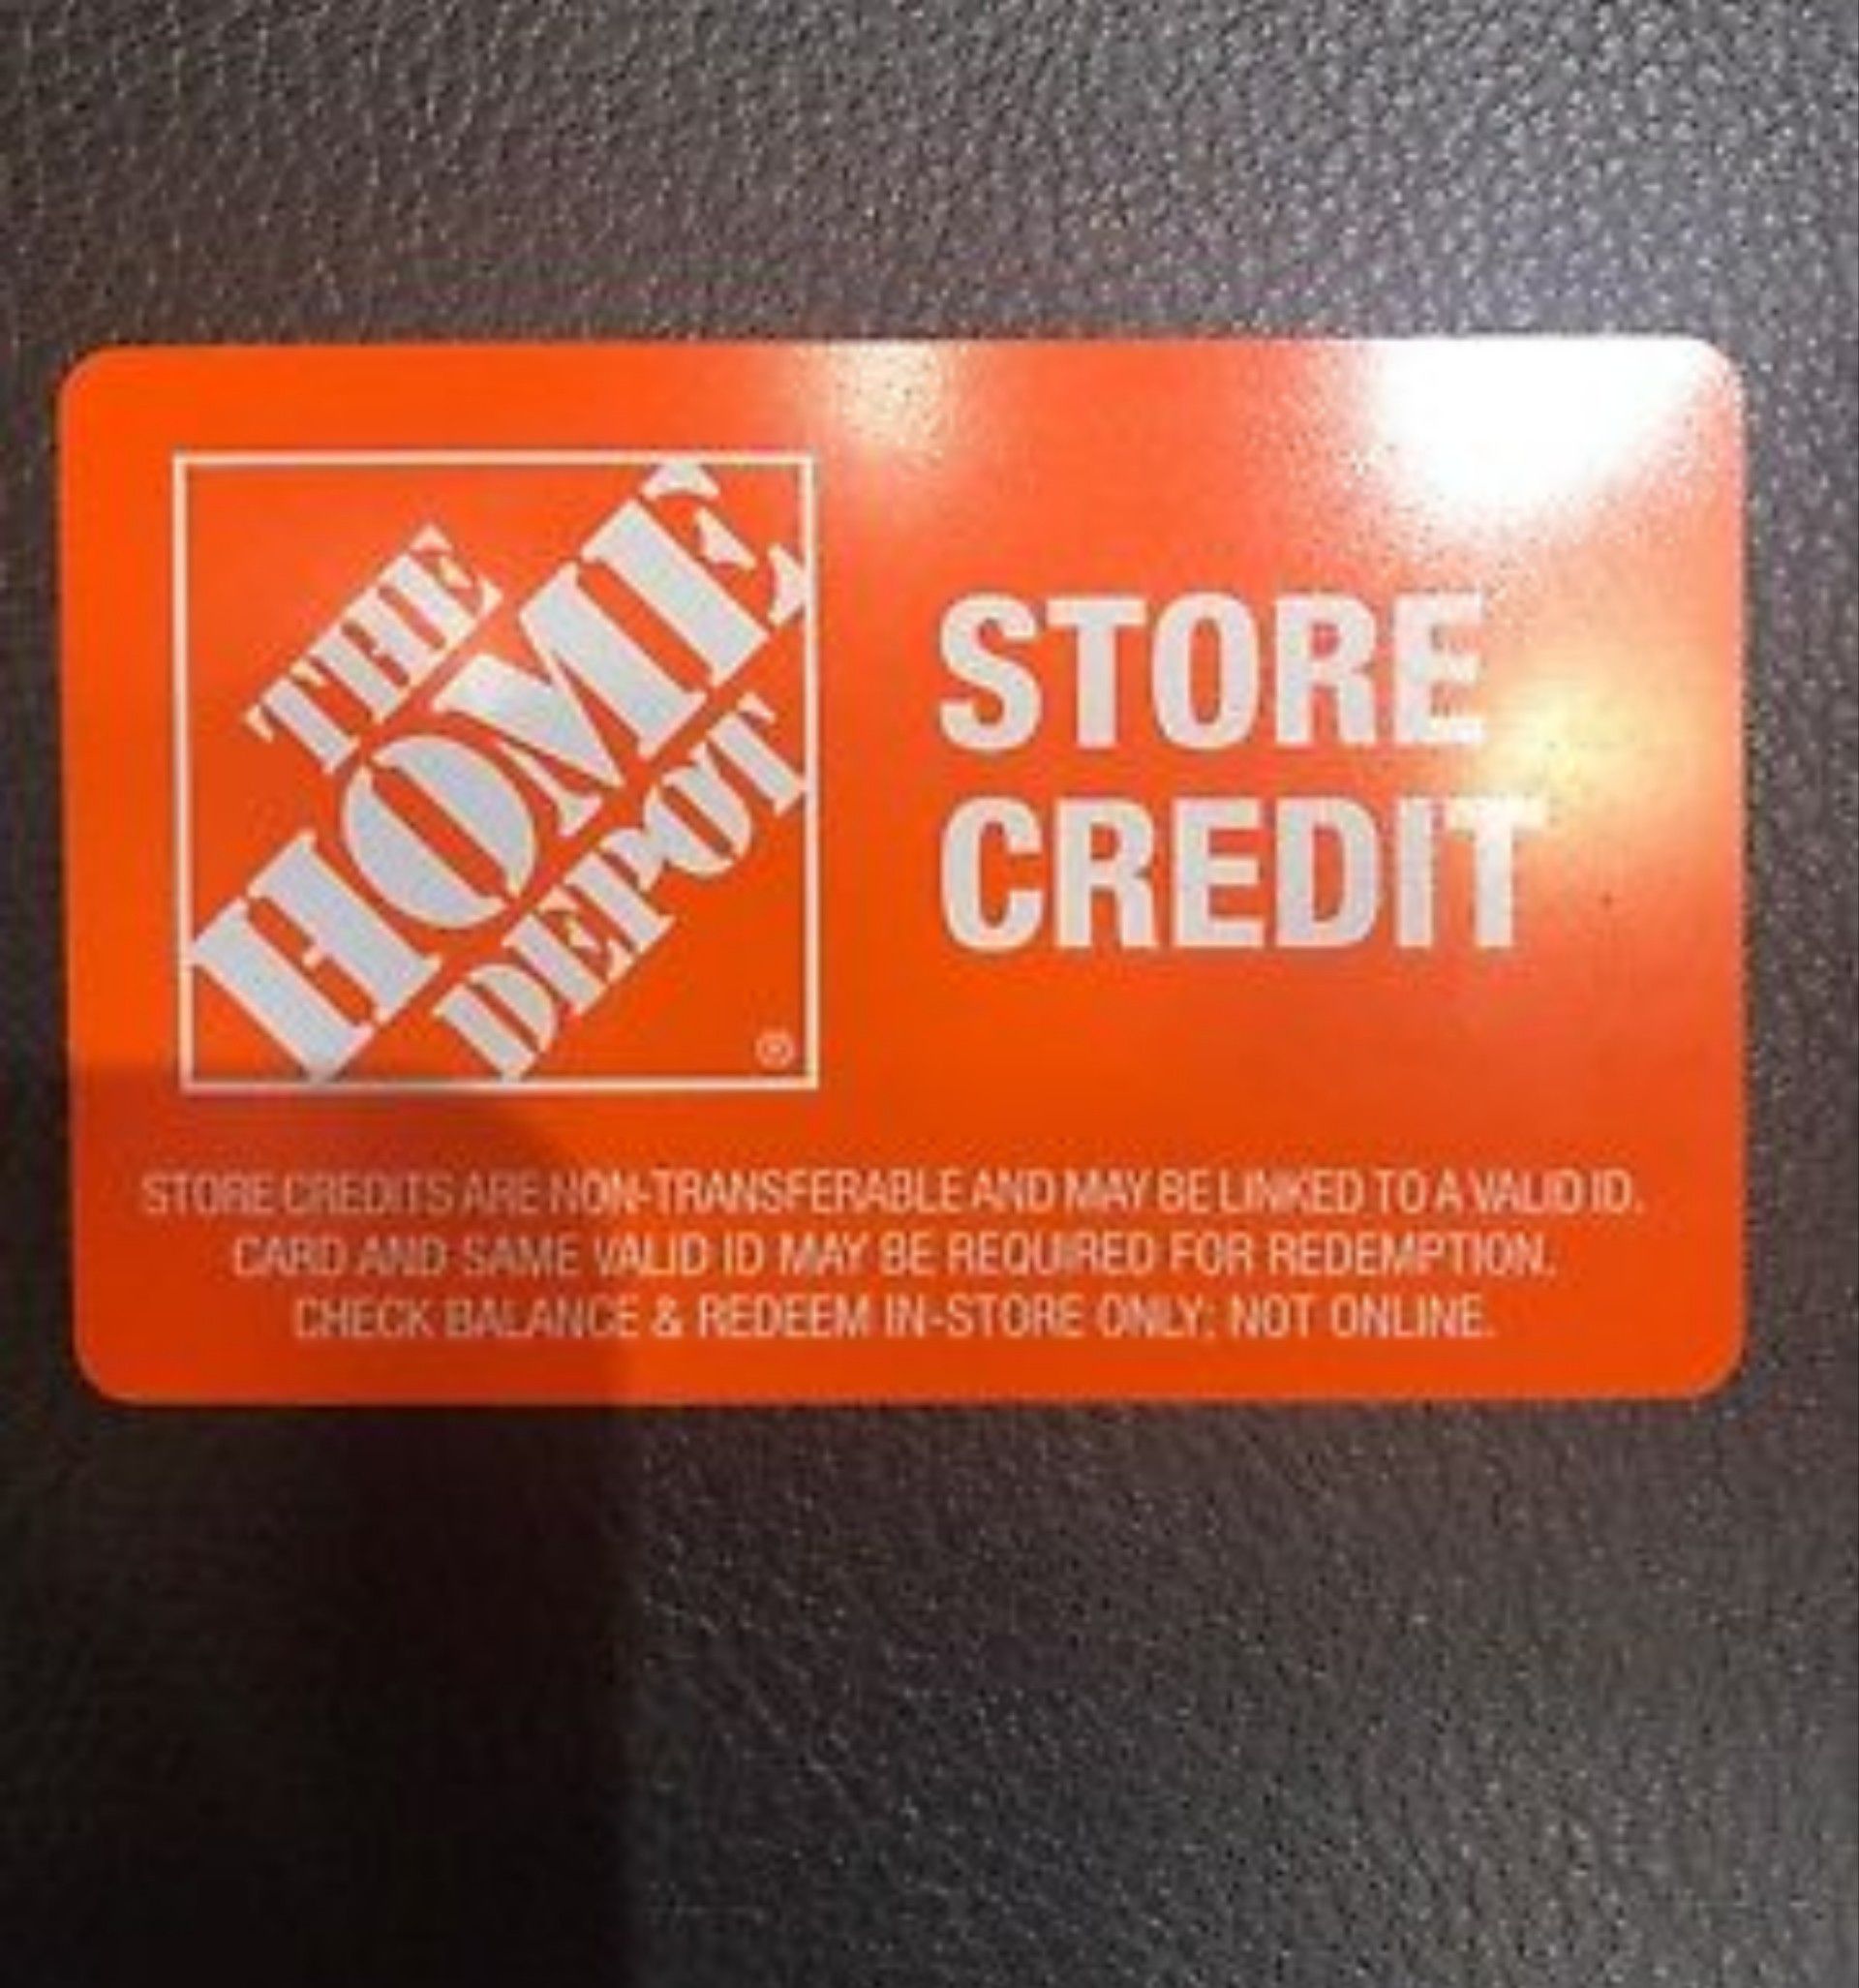 How Does Home Depot Store Credit Work? - family-gadgets.ru